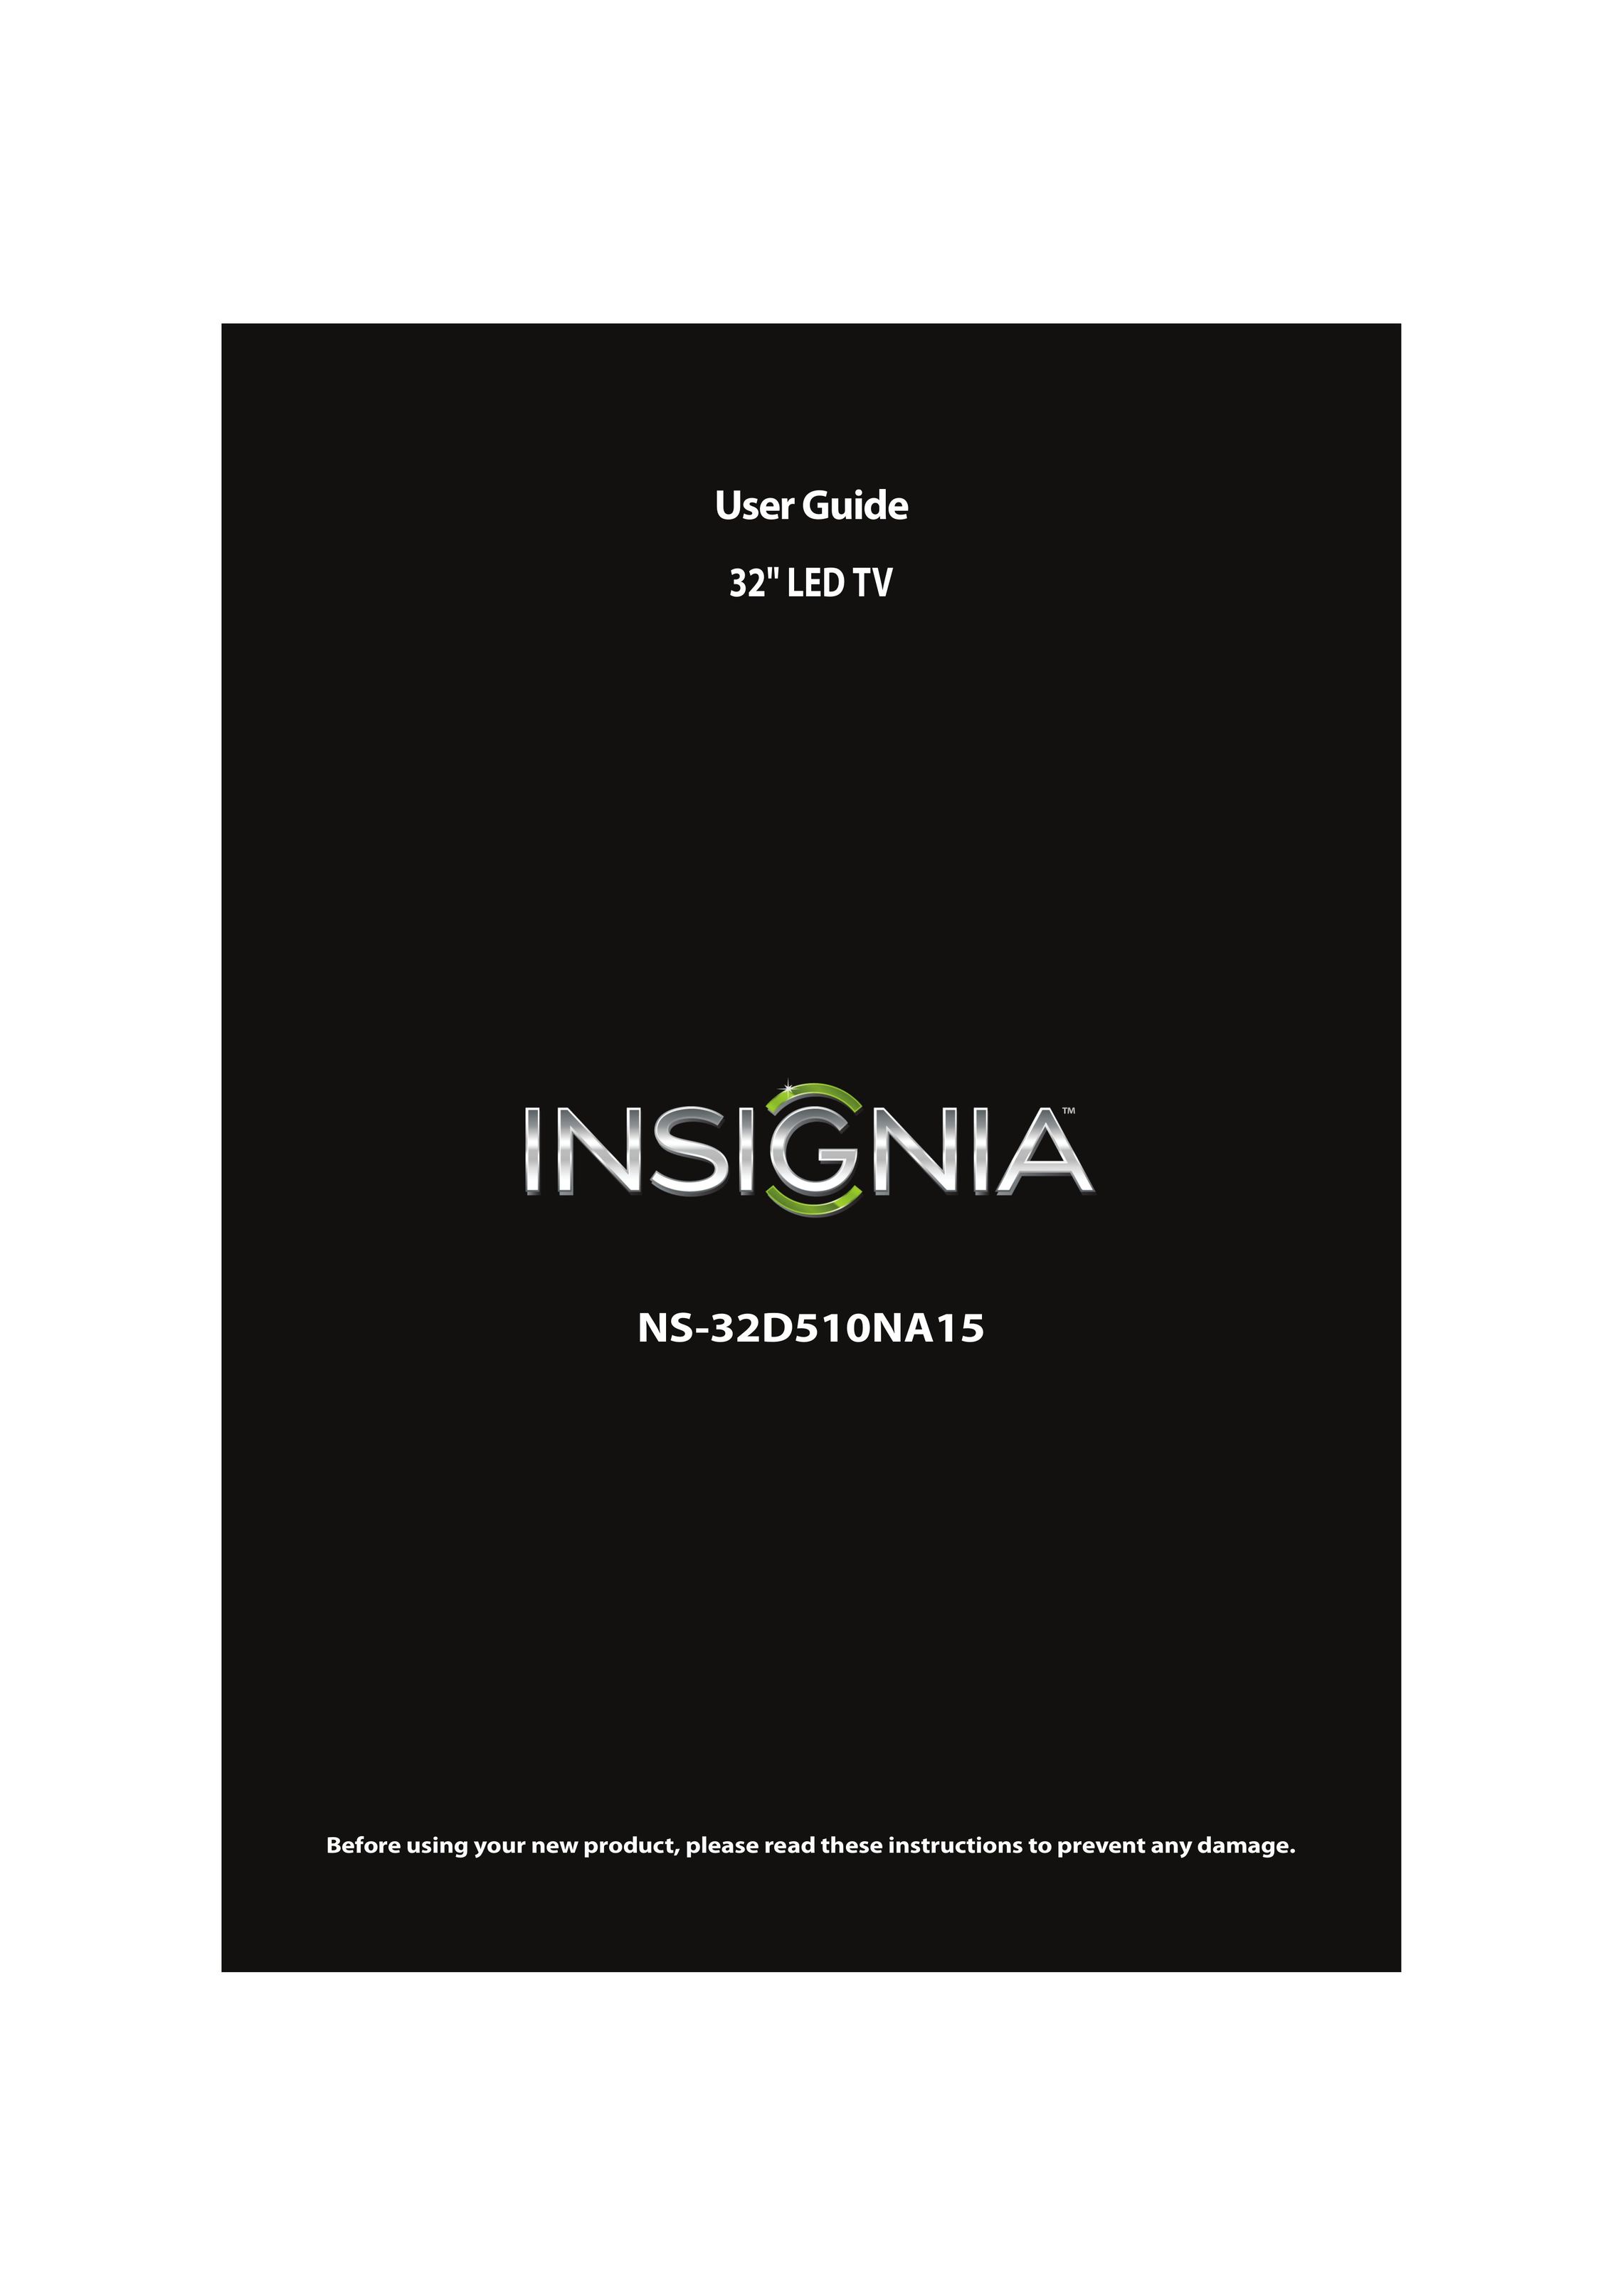 Insignia NS-32D510NA15 Video Game Console User Manual (Page 1)